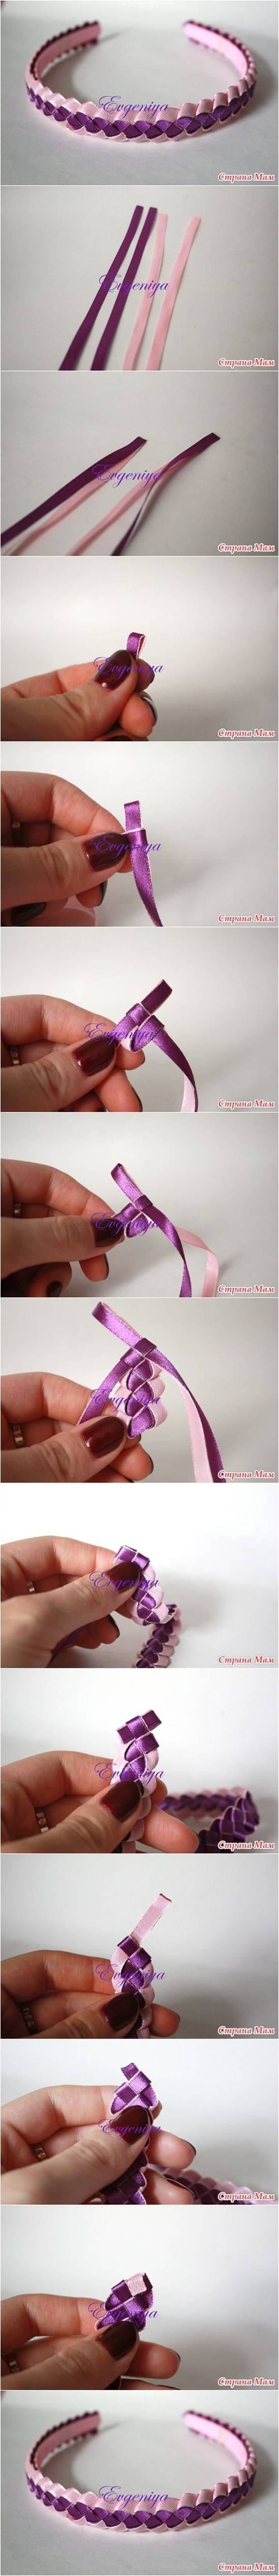 How to Weave Four Strand Braided Ribbon